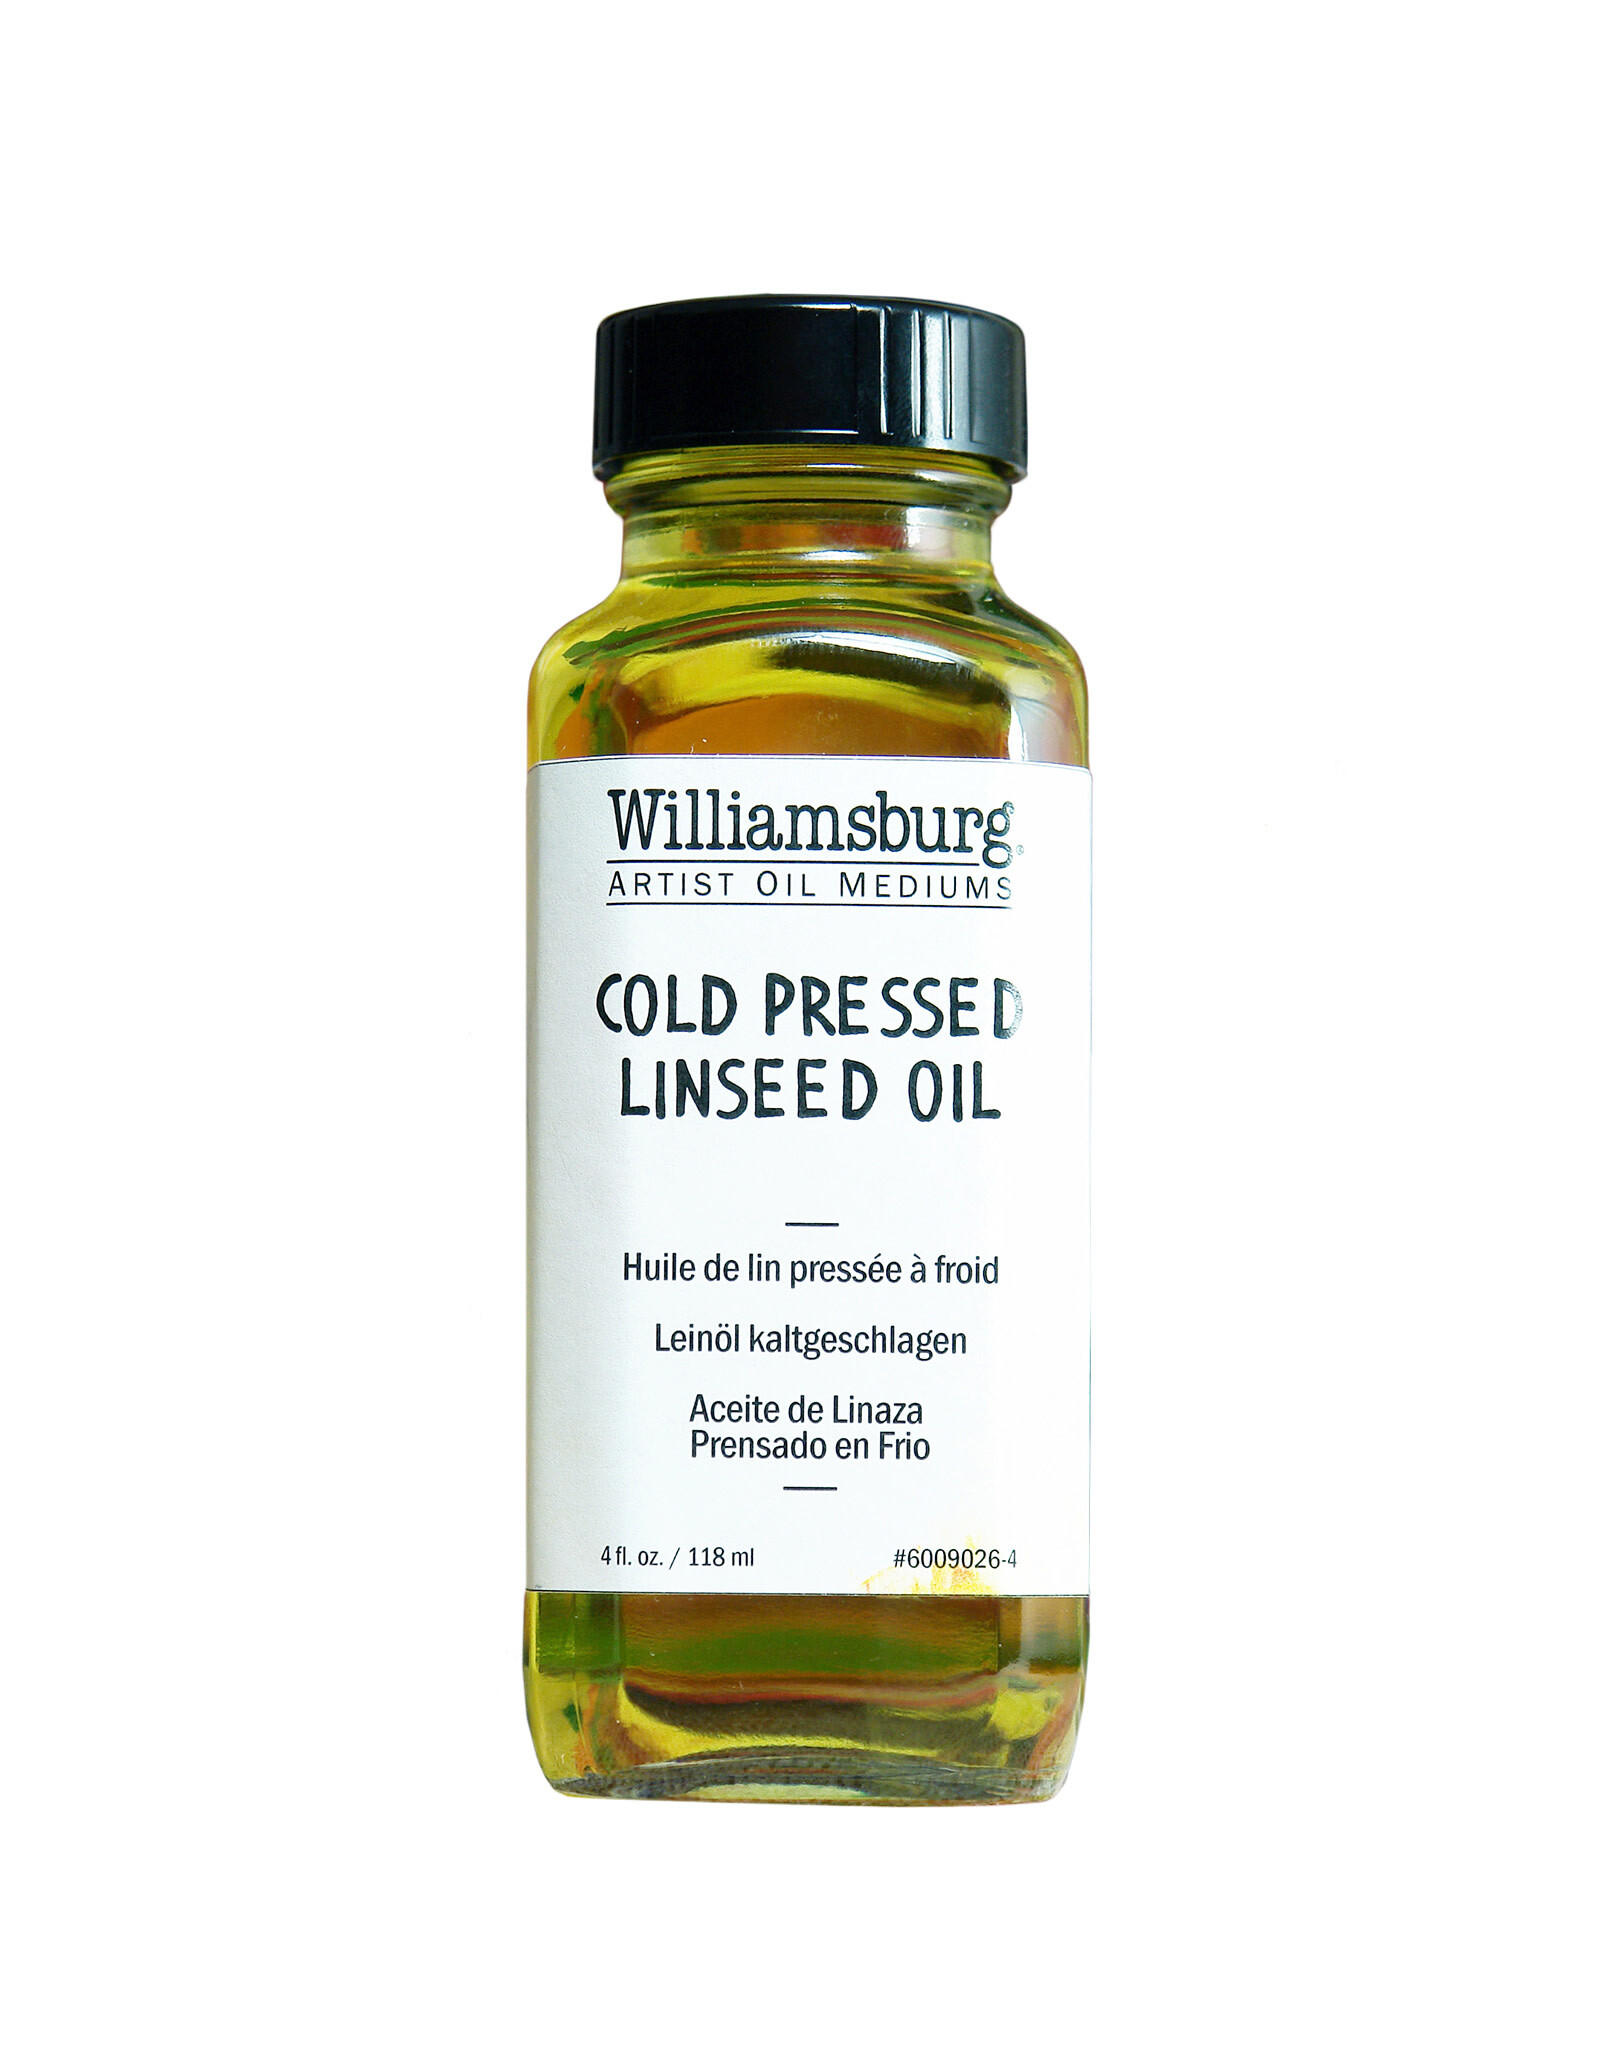 Golden Williamsburg Cold Pressed Linseed Oil 4oz